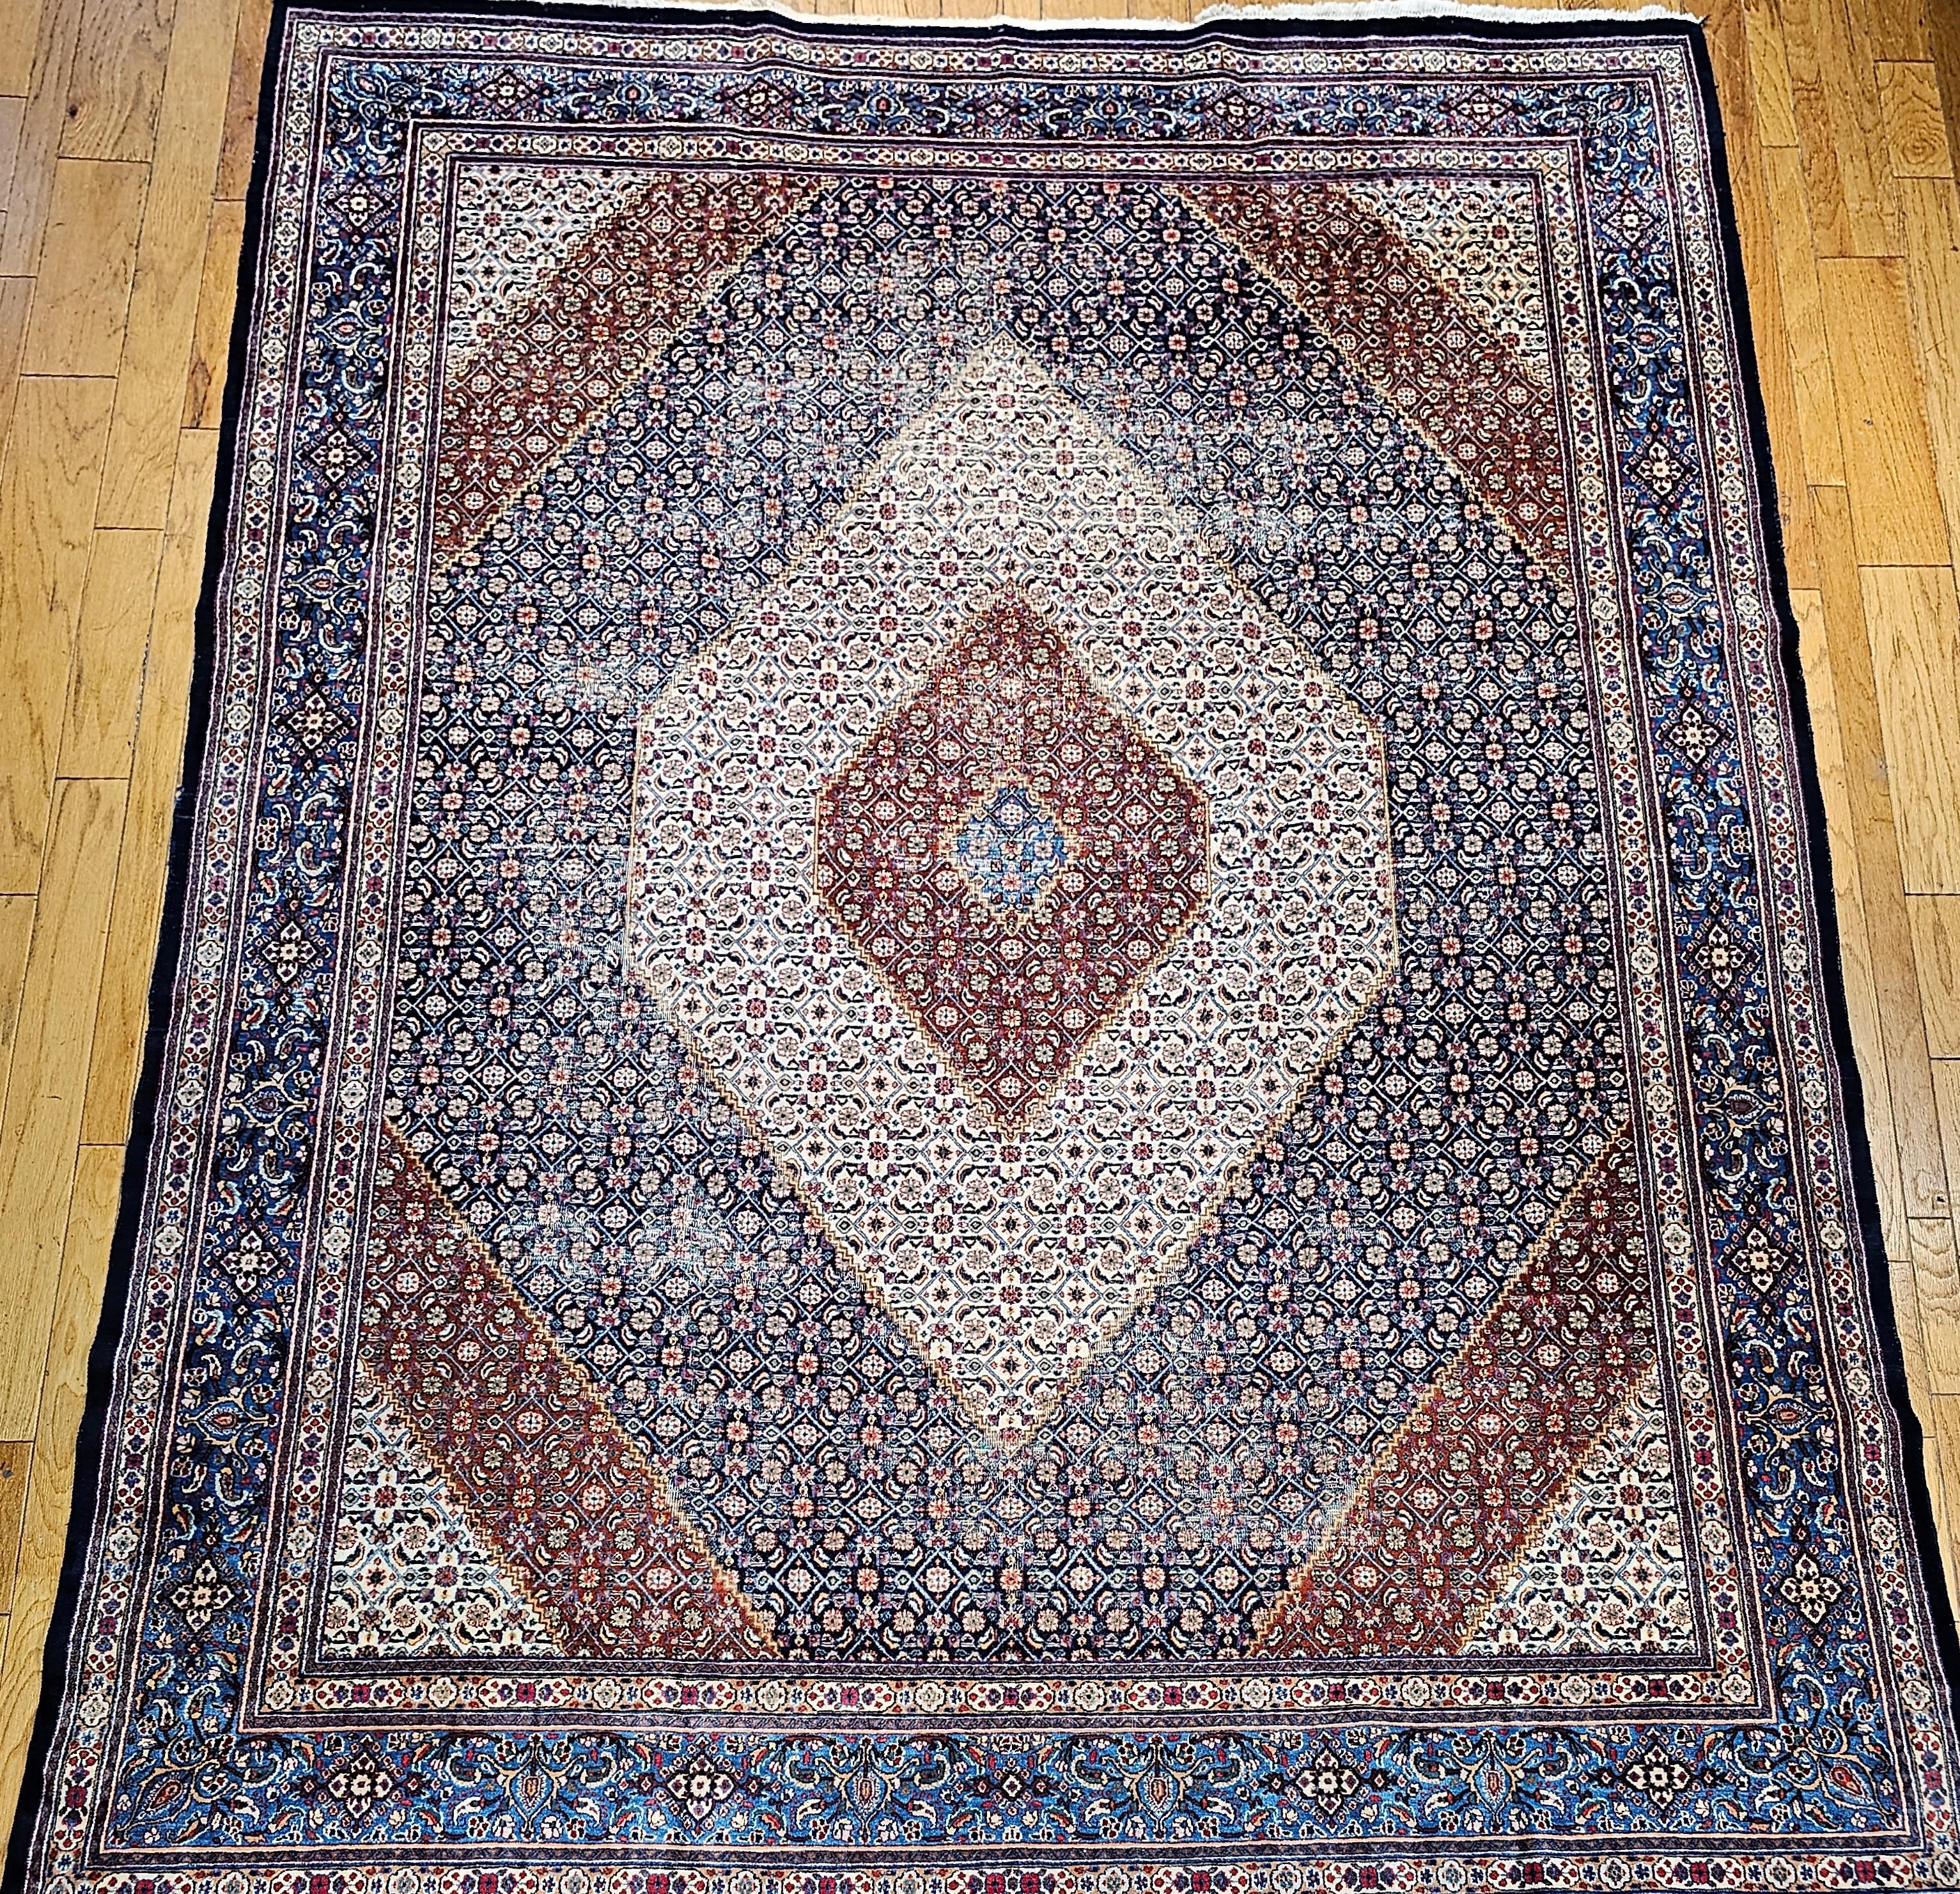 This Persian Tabriz Mahi was woven by an artisan workshop in the city of Tabriz in NW Persia.  This vintage Tabriz Mahi has a Herati design throughout the field and comes in a very unique color combination. The primary field color is navy blue with